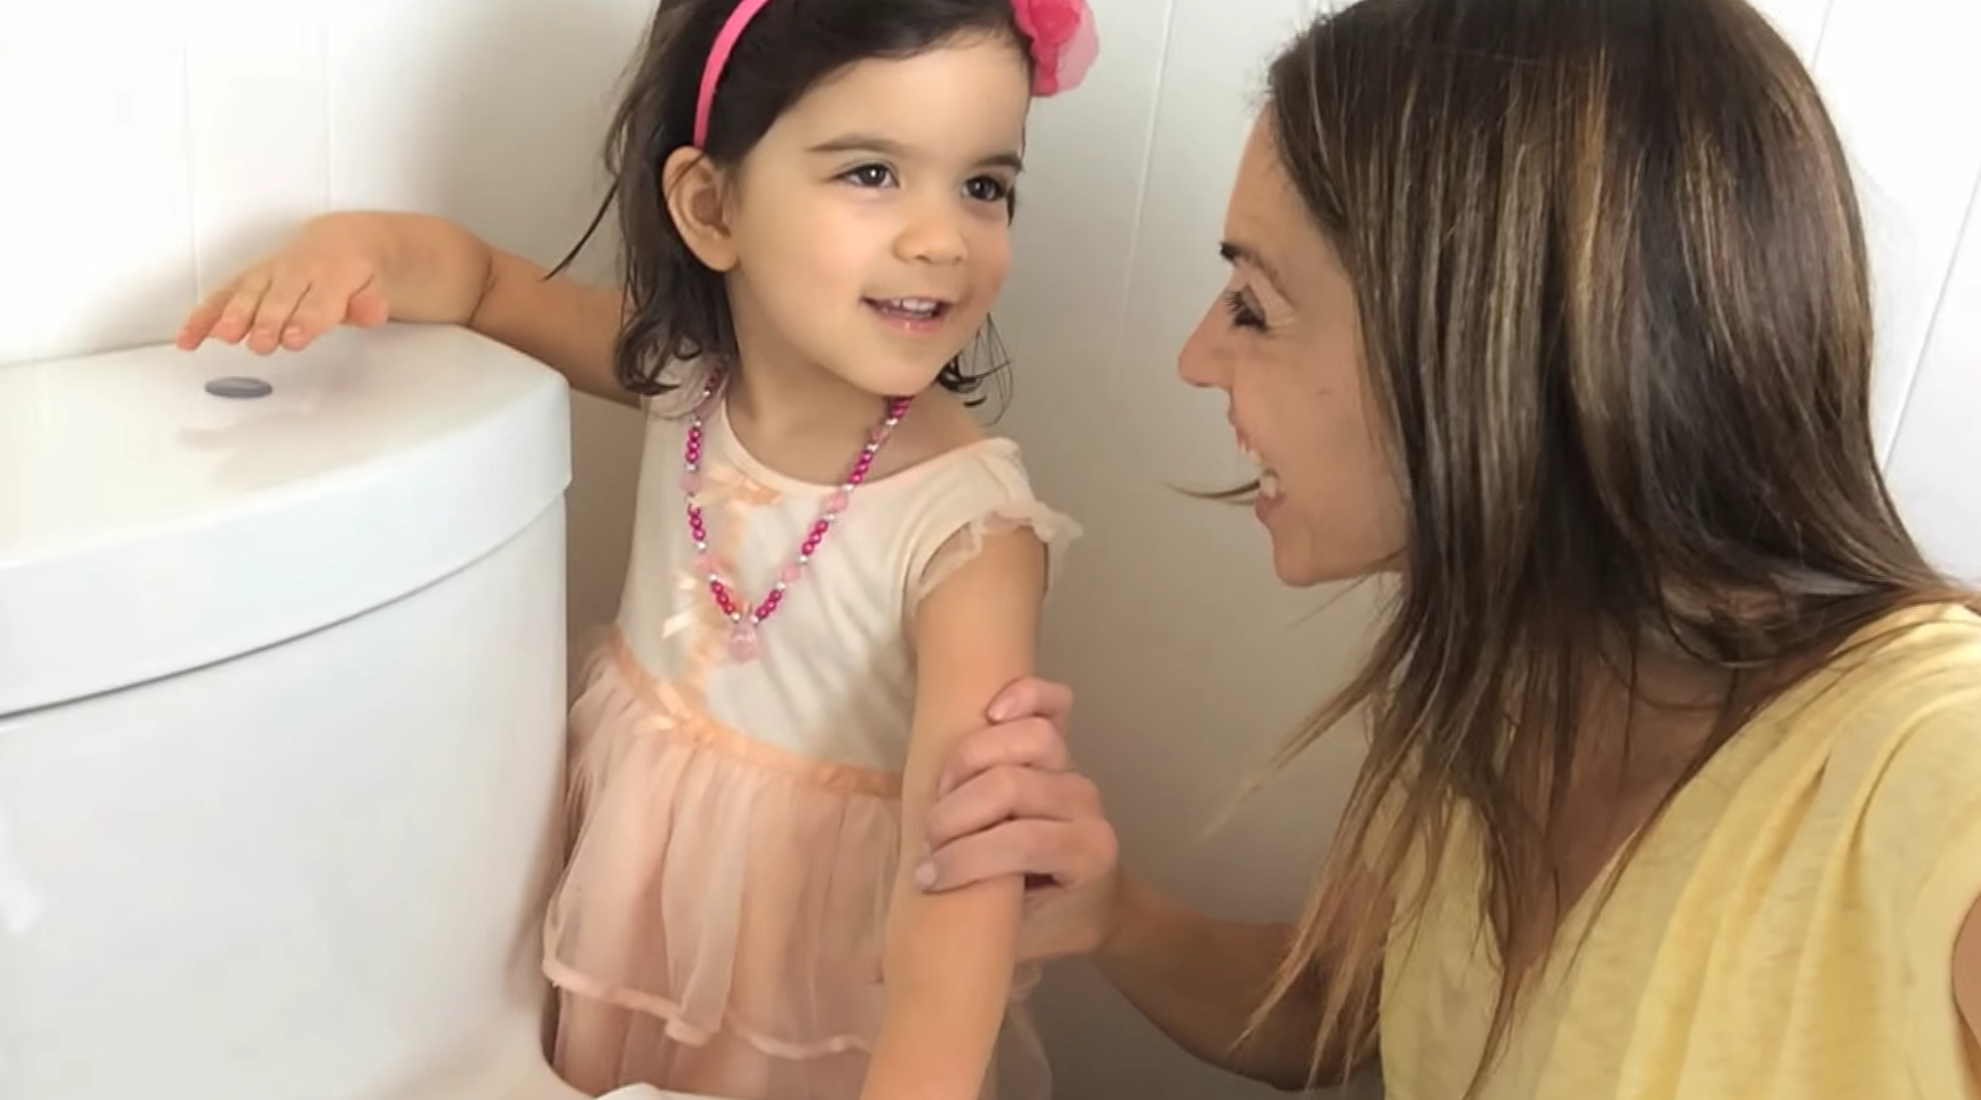 Great potty training tips to help get your kid on the toilet faster. And some successes too. It worked for one mom, it can work for you too.